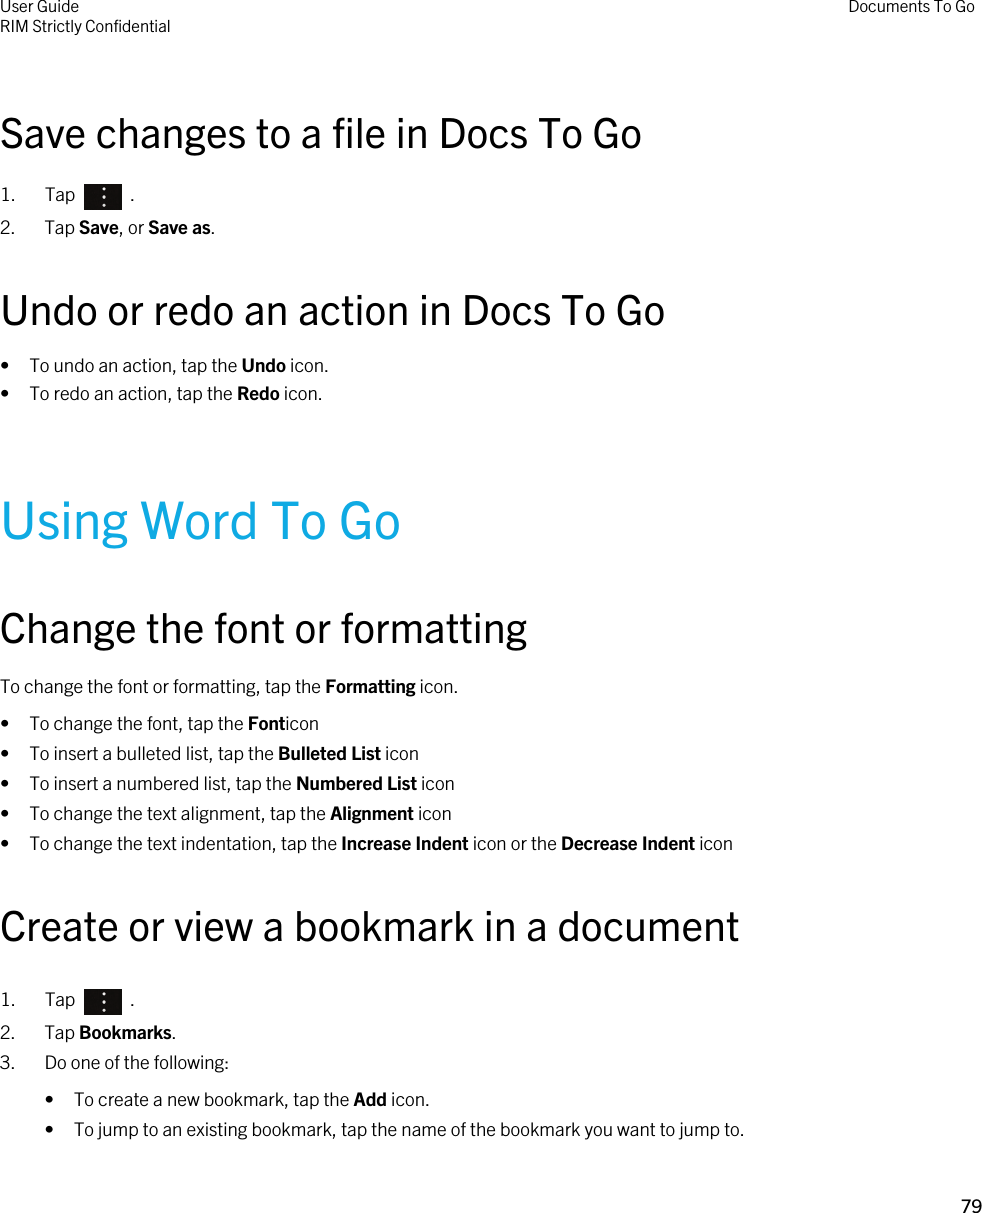 Save changes to a file in Docs To Go1.  Tap    .2. Tap Save, or Save as.Undo or redo an action in Docs To Go• To undo an action, tap the Undo icon.• To redo an action, tap the Redo icon.Using Word To GoChange the font or formattingTo change the font or formatting, tap the Formatting icon.• To change the font, tap the Fonticon• To insert a bulleted list, tap the Bulleted List icon• To insert a numbered list, tap the Numbered List icon• To change the text alignment, tap the Alignment icon• To change the text indentation, tap the Increase Indent icon or the Decrease Indent iconCreate or view a bookmark in a document1.  Tap    .2. Tap Bookmarks.3. Do one of the following:• To create a new bookmark, tap the Add icon.• To jump to an existing bookmark, tap the name of the bookmark you want to jump to.User GuideRIM Strictly ConfidentialDocuments To Go79 